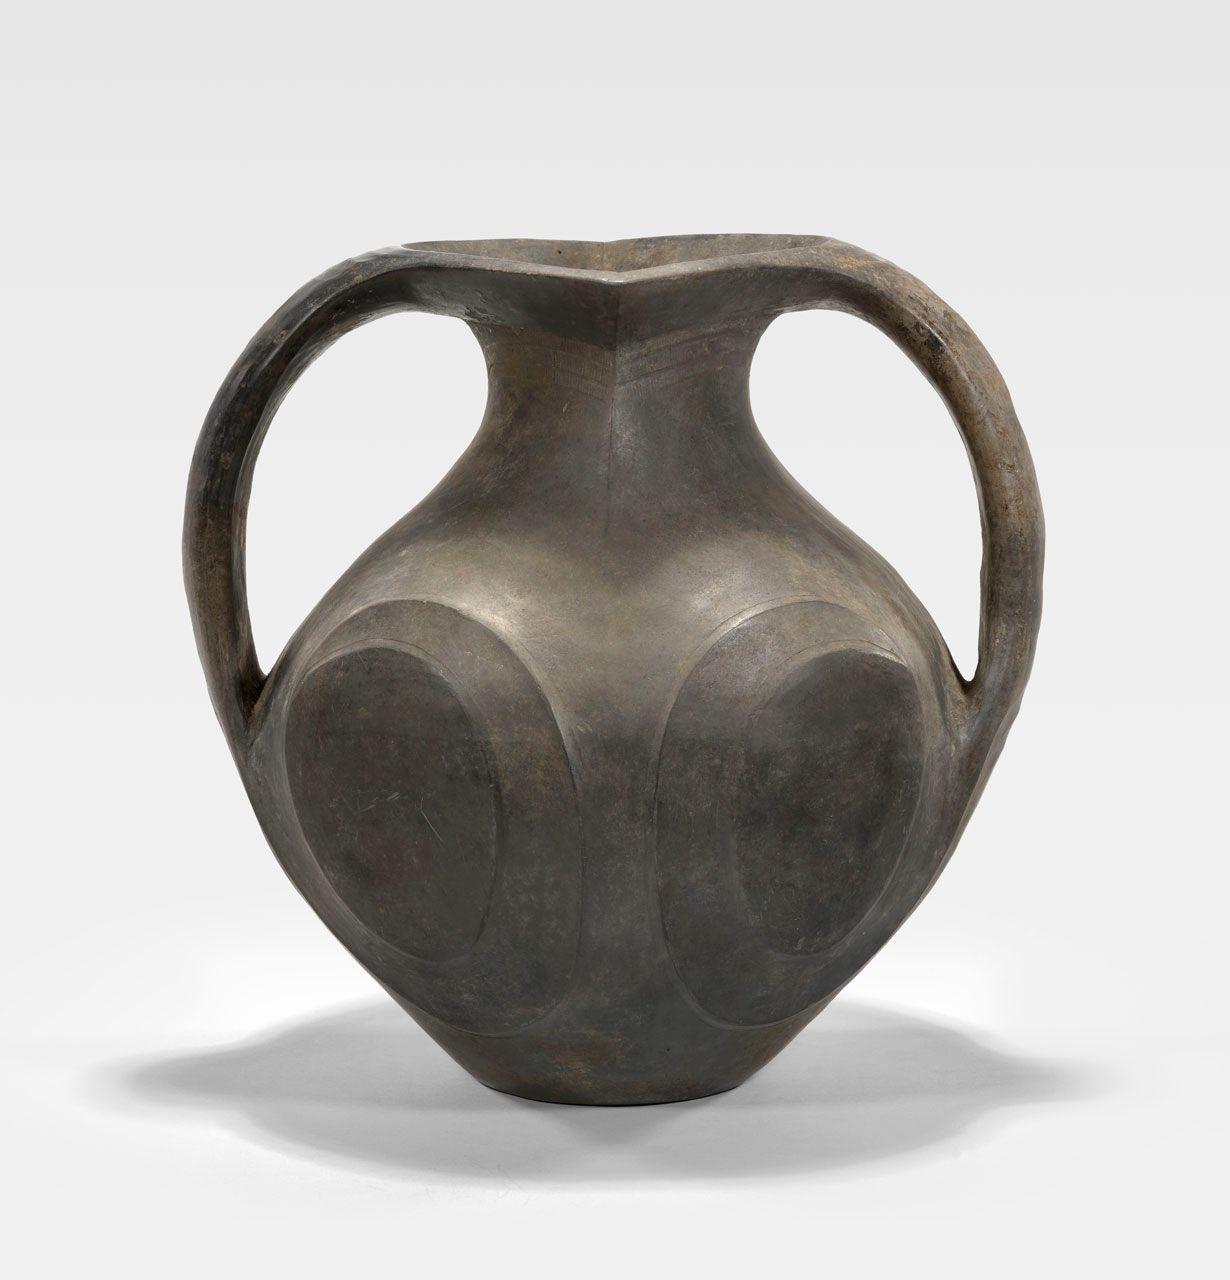 Amphora with Two Handles
Chinese 
2021.90.1